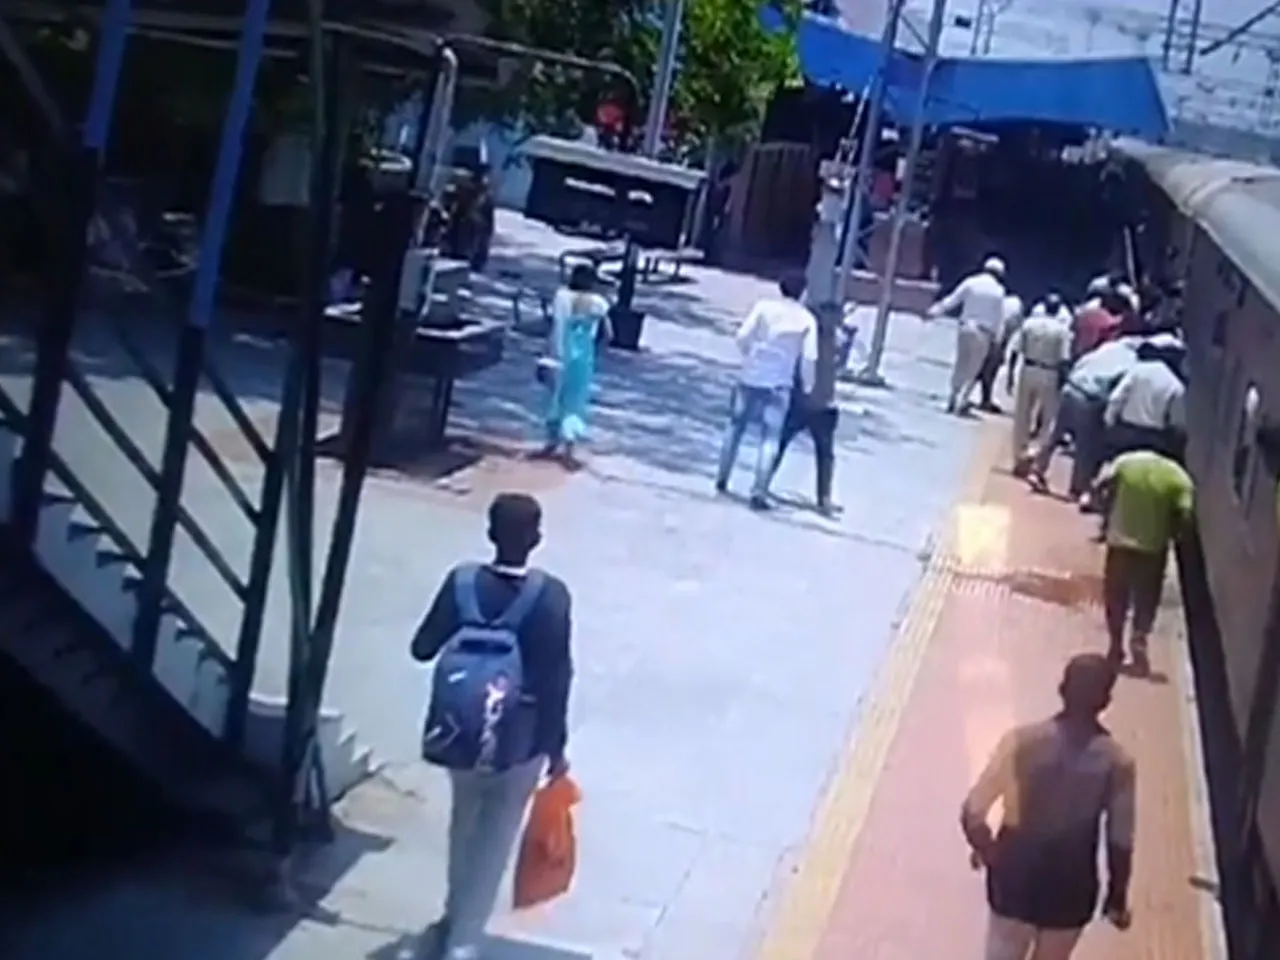 Do not board a moving train, See the video